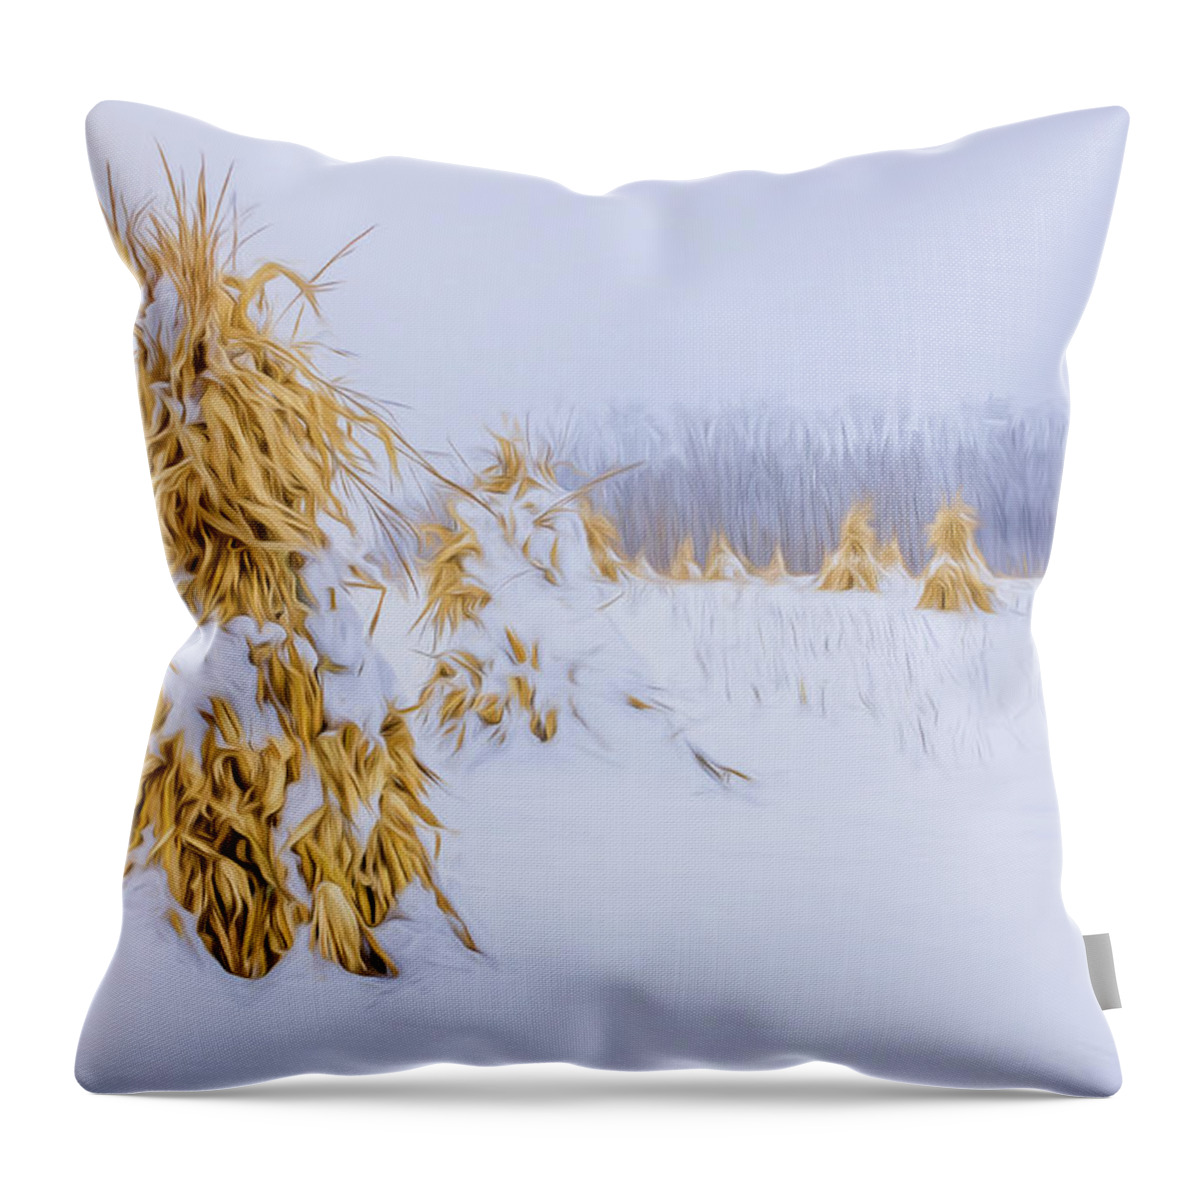 Abstract Throw Pillow featuring the photograph Snowy Corn Shocks - Artistic by Chris Bordeleau